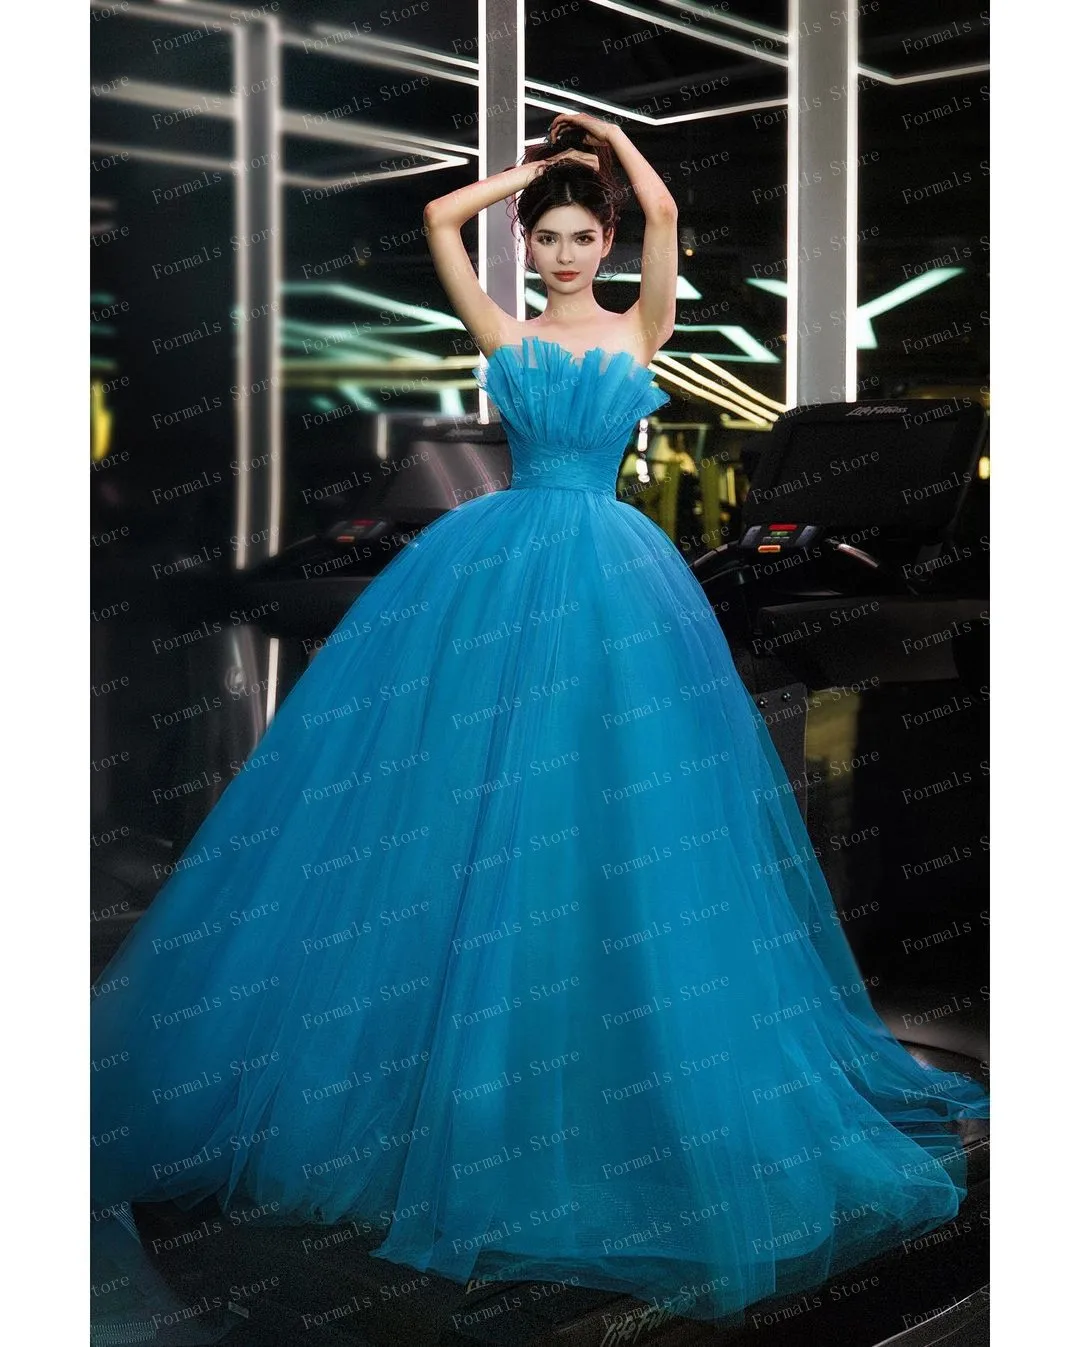 Ruffled Strapless A line Woman Clothes Ice Blue Evening Dresses With Train Elegant Wedding Dress For